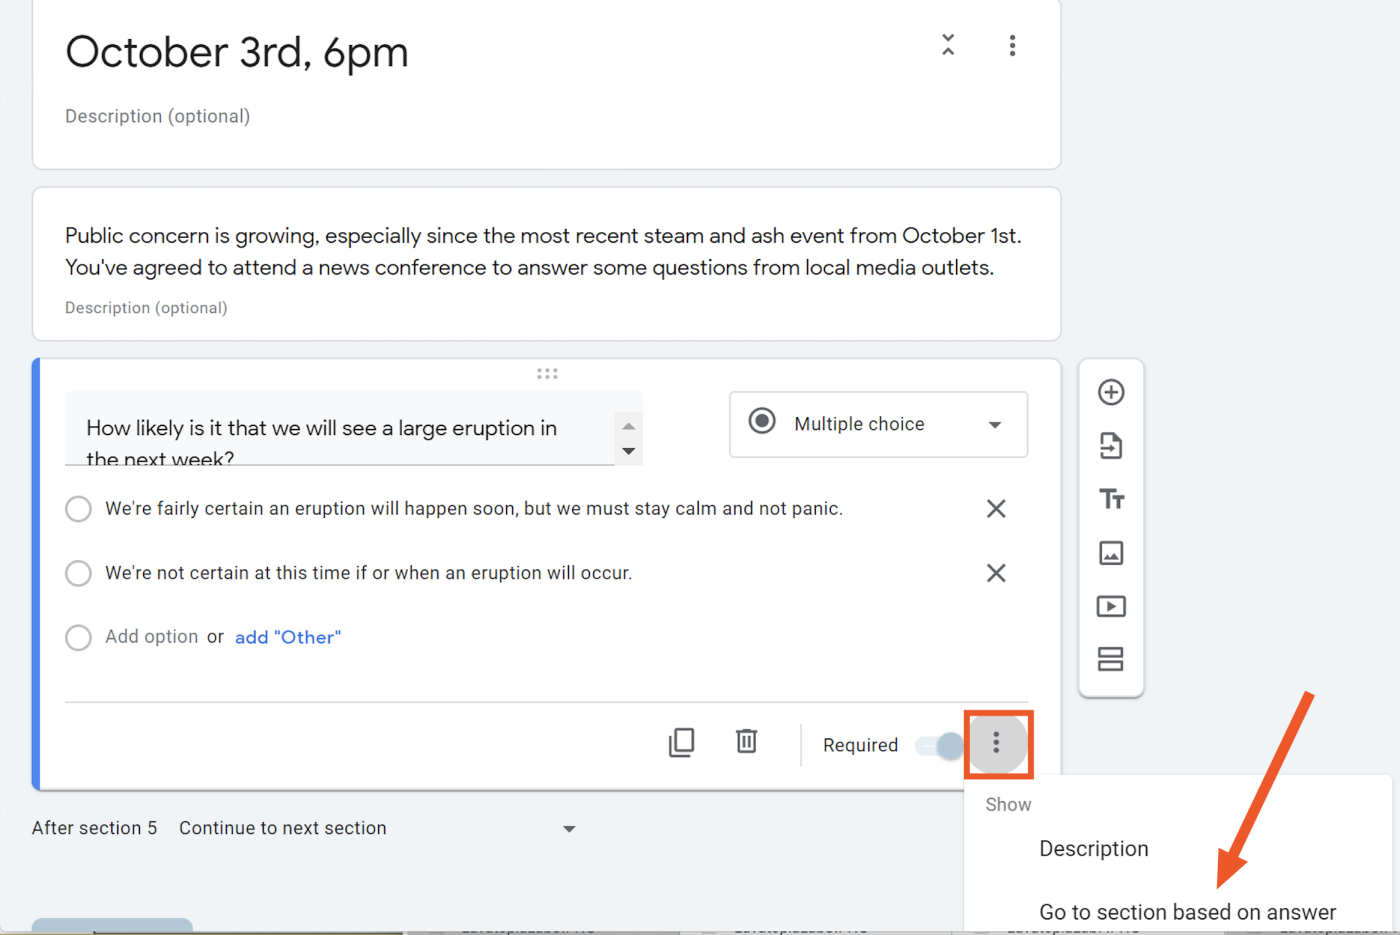 Screenshot of the Go to section feature in Google Forms